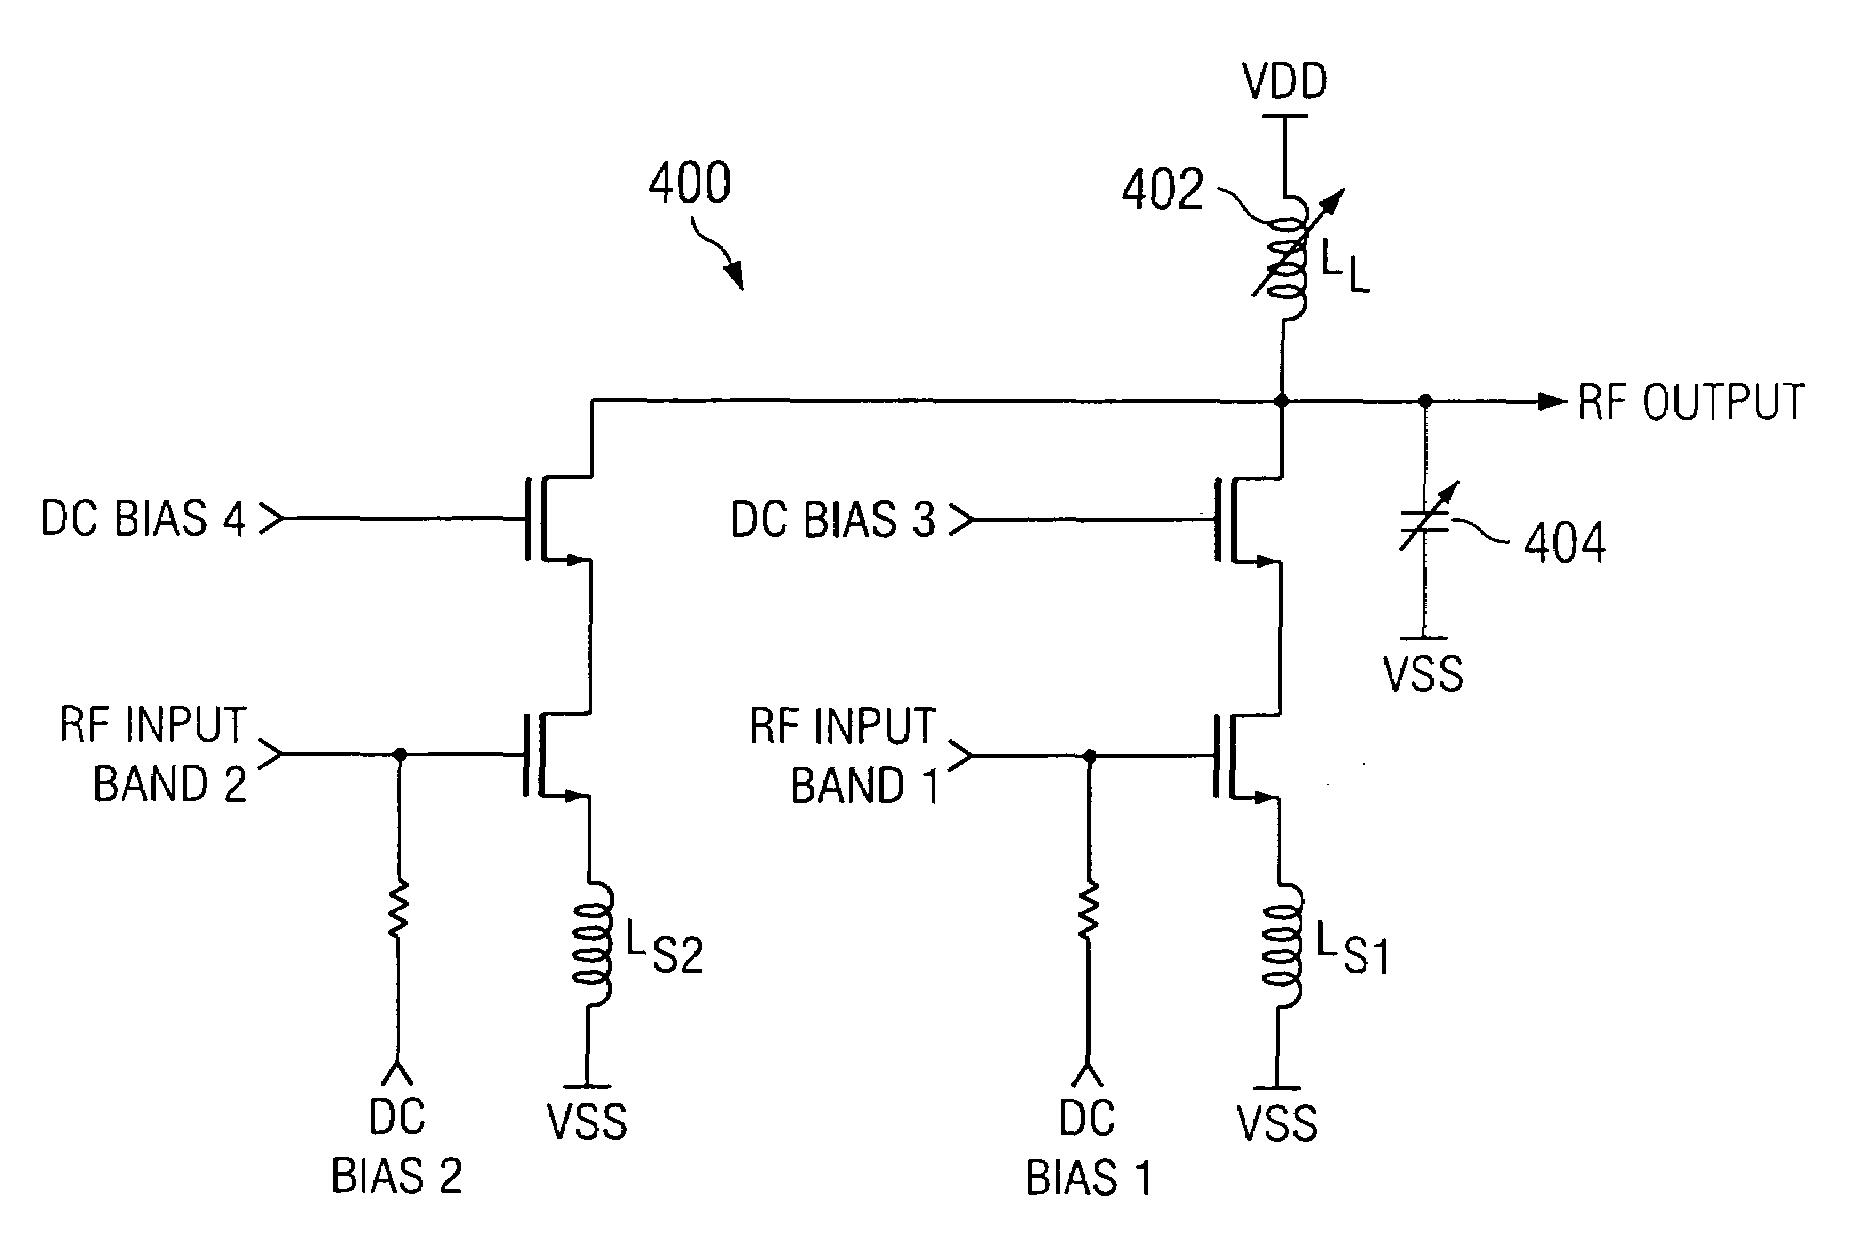 Multi-band low noise amplifier system